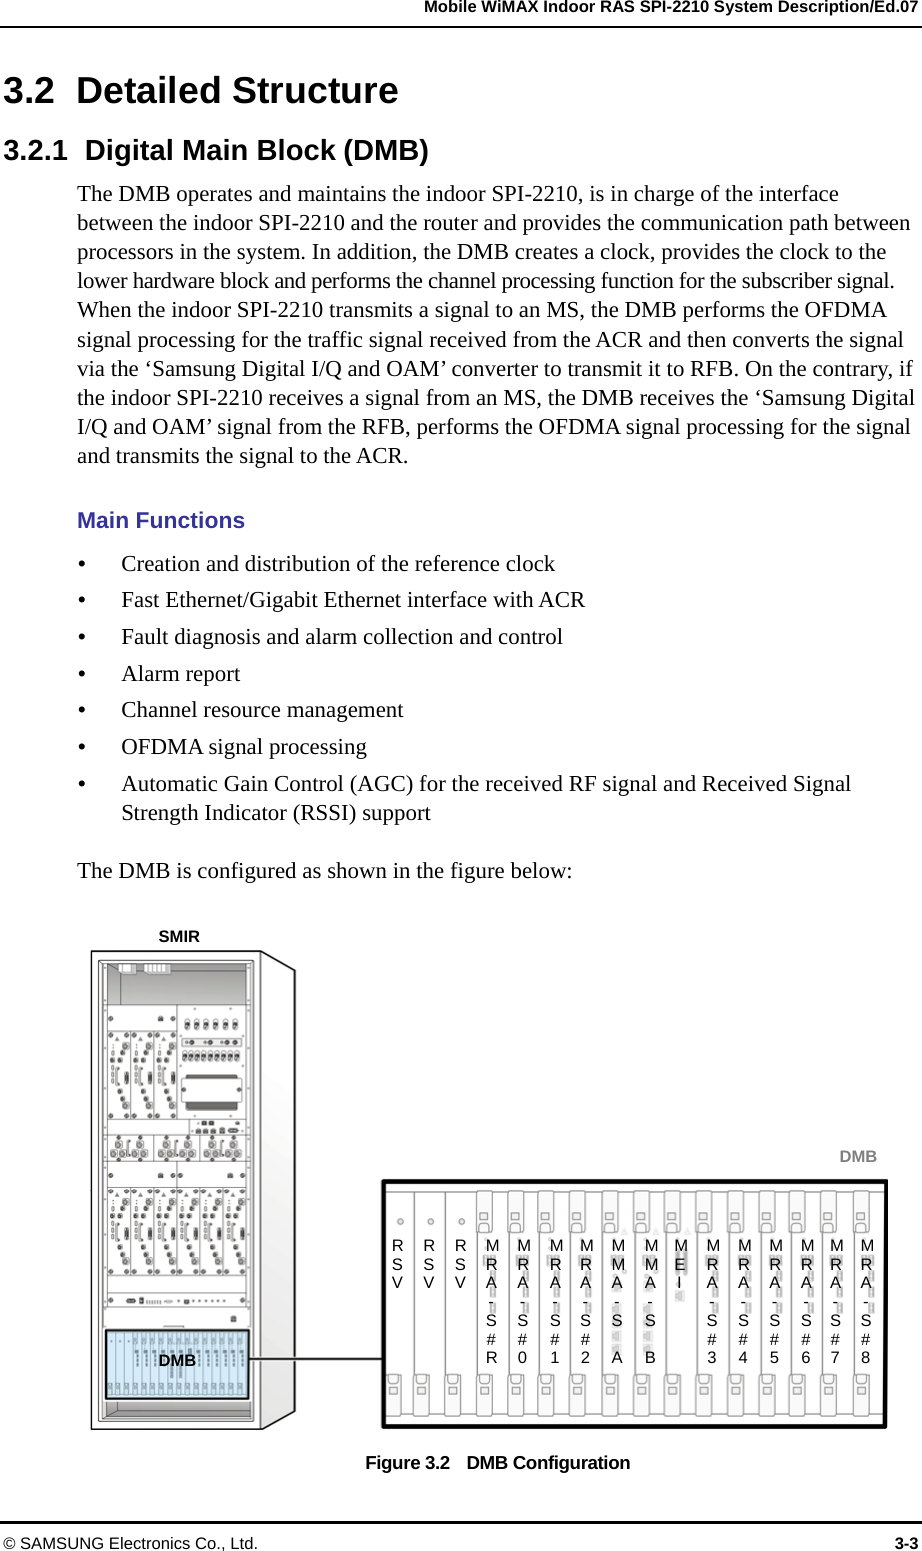   Mobile WiMAX Indoor RAS SPI-2210 System Description/Ed.07 © SAMSUNG Electronics Co., Ltd.  3-3 3.2 Detailed Structure 3.2.1  Digital Main Block (DMB) The DMB operates and maintains the indoor SPI-2210, is in charge of the interface between the indoor SPI-2210 and the router and provides the communication path between processors in the system. In addition, the DMB creates a clock, provides the clock to the lower hardware block and performs the channel processing function for the subscriber signal. When the indoor SPI-2210 transmits a signal to an MS, the DMB performs the OFDMA signal processing for the traffic signal received from the ACR and then converts the signal via the ‘Samsung Digital I/Q and OAM’ converter to transmit it to RFB. On the contrary, if the indoor SPI-2210 receives a signal from an MS, the DMB receives the ‘Samsung Digital I/Q and OAM’ signal from the RFB, performs the OFDMA signal processing for the signal and transmits the signal to the ACR.  Main Functions y Creation and distribution of the reference clock y Fast Ethernet/Gigabit Ethernet interface with ACR y Fault diagnosis and alarm collection and control y Alarm report y Channel resource management y OFDMA signal processing y Automatic Gain Control (AGC) for the received RF signal and Received Signal Strength Indicator (RSSI) support  The DMB is configured as shown in the figure below:  Figure 3.2    DMB Configuration SMIRDMB RSVRSVRSVMRA-S#RMRA-S#0MRA-S#1MRA-S#2MMA-S AMMA-S BMEIM RA- S#3 M RA- S#4 M RA- S#5 M RA- S#6 M RA- S#7 MRA- S#8DMB